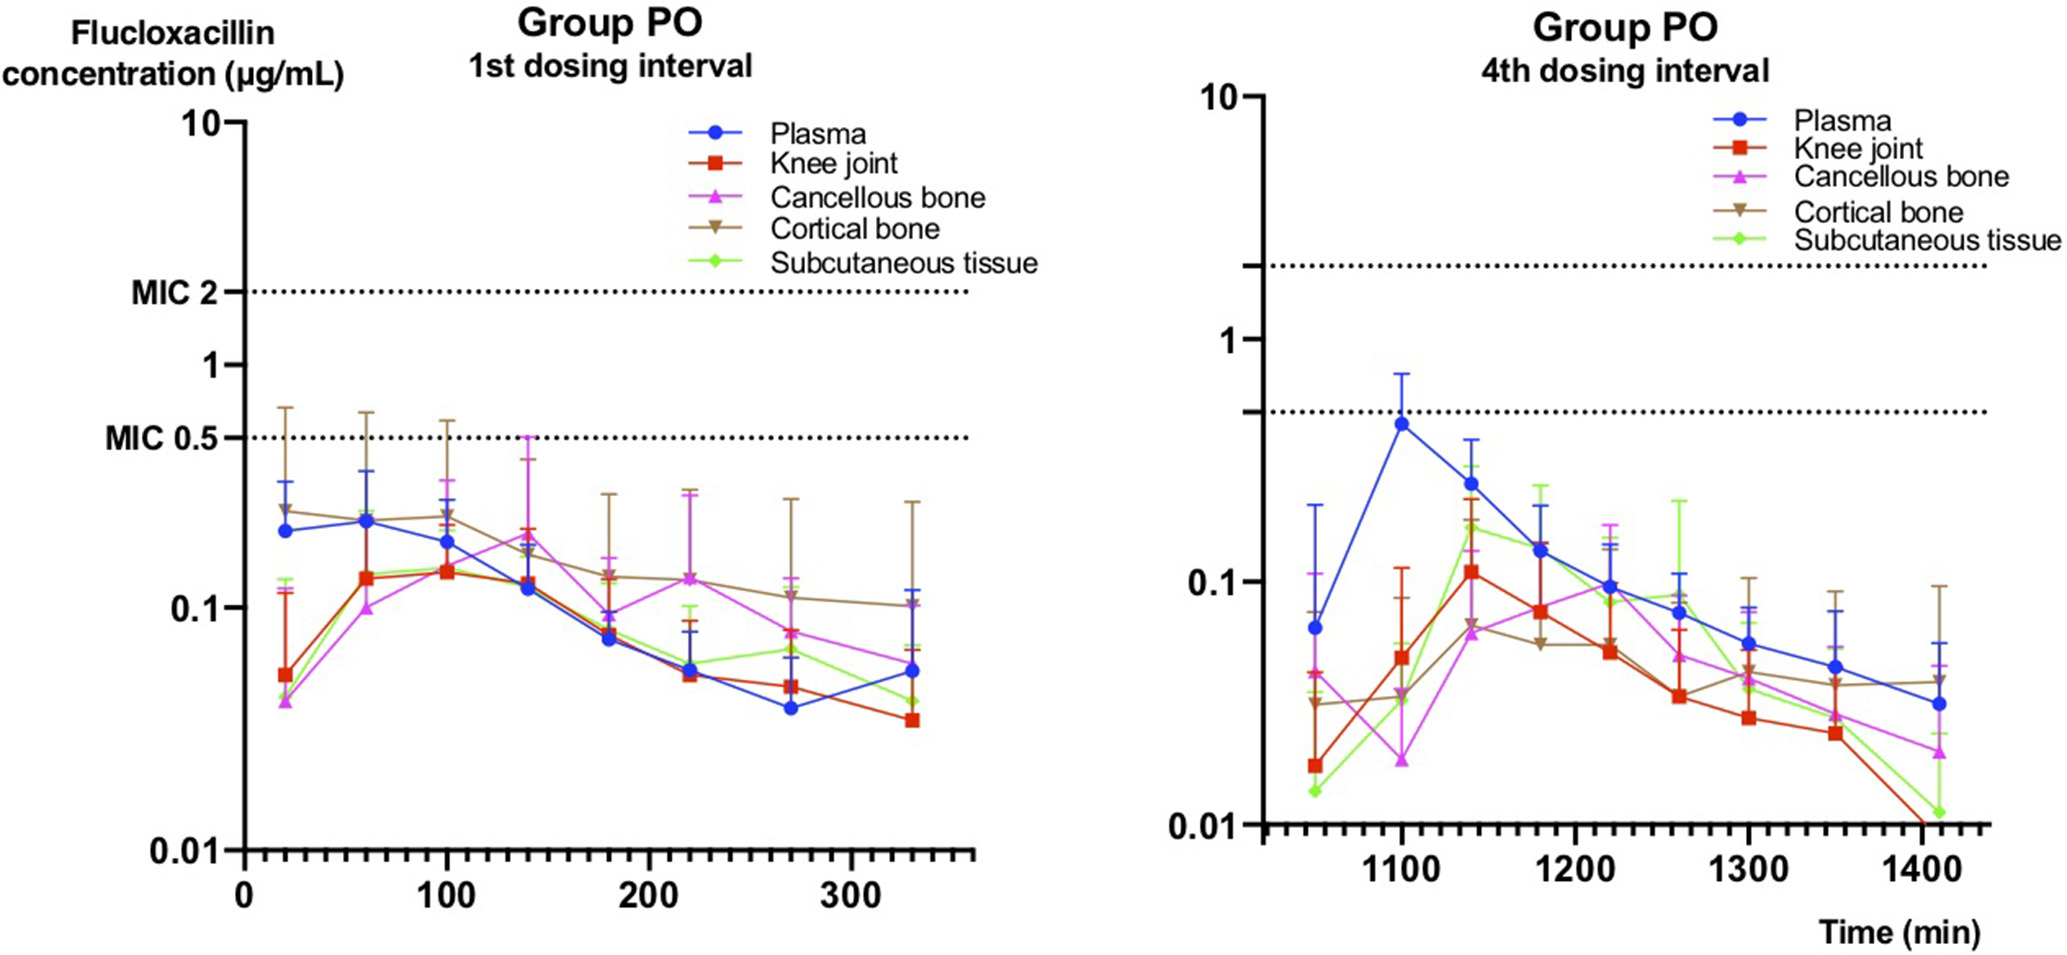 Fig. 1 
          Mean concentration-time profiles in Group PO for plasma, subcutaneous tissue, knee joint, and cancellous and cortical bone. The error bars represent upper 95% confidence intervals (CIs). The figure displays the profiles of the first and the fourth dosing intervals. Minimum inhibitory concentrations (MICs: 0.5 μg/ml and 2.0 μg/ml) are indicated by the dotted horizontal lines (y-axis is log-scaled).
        